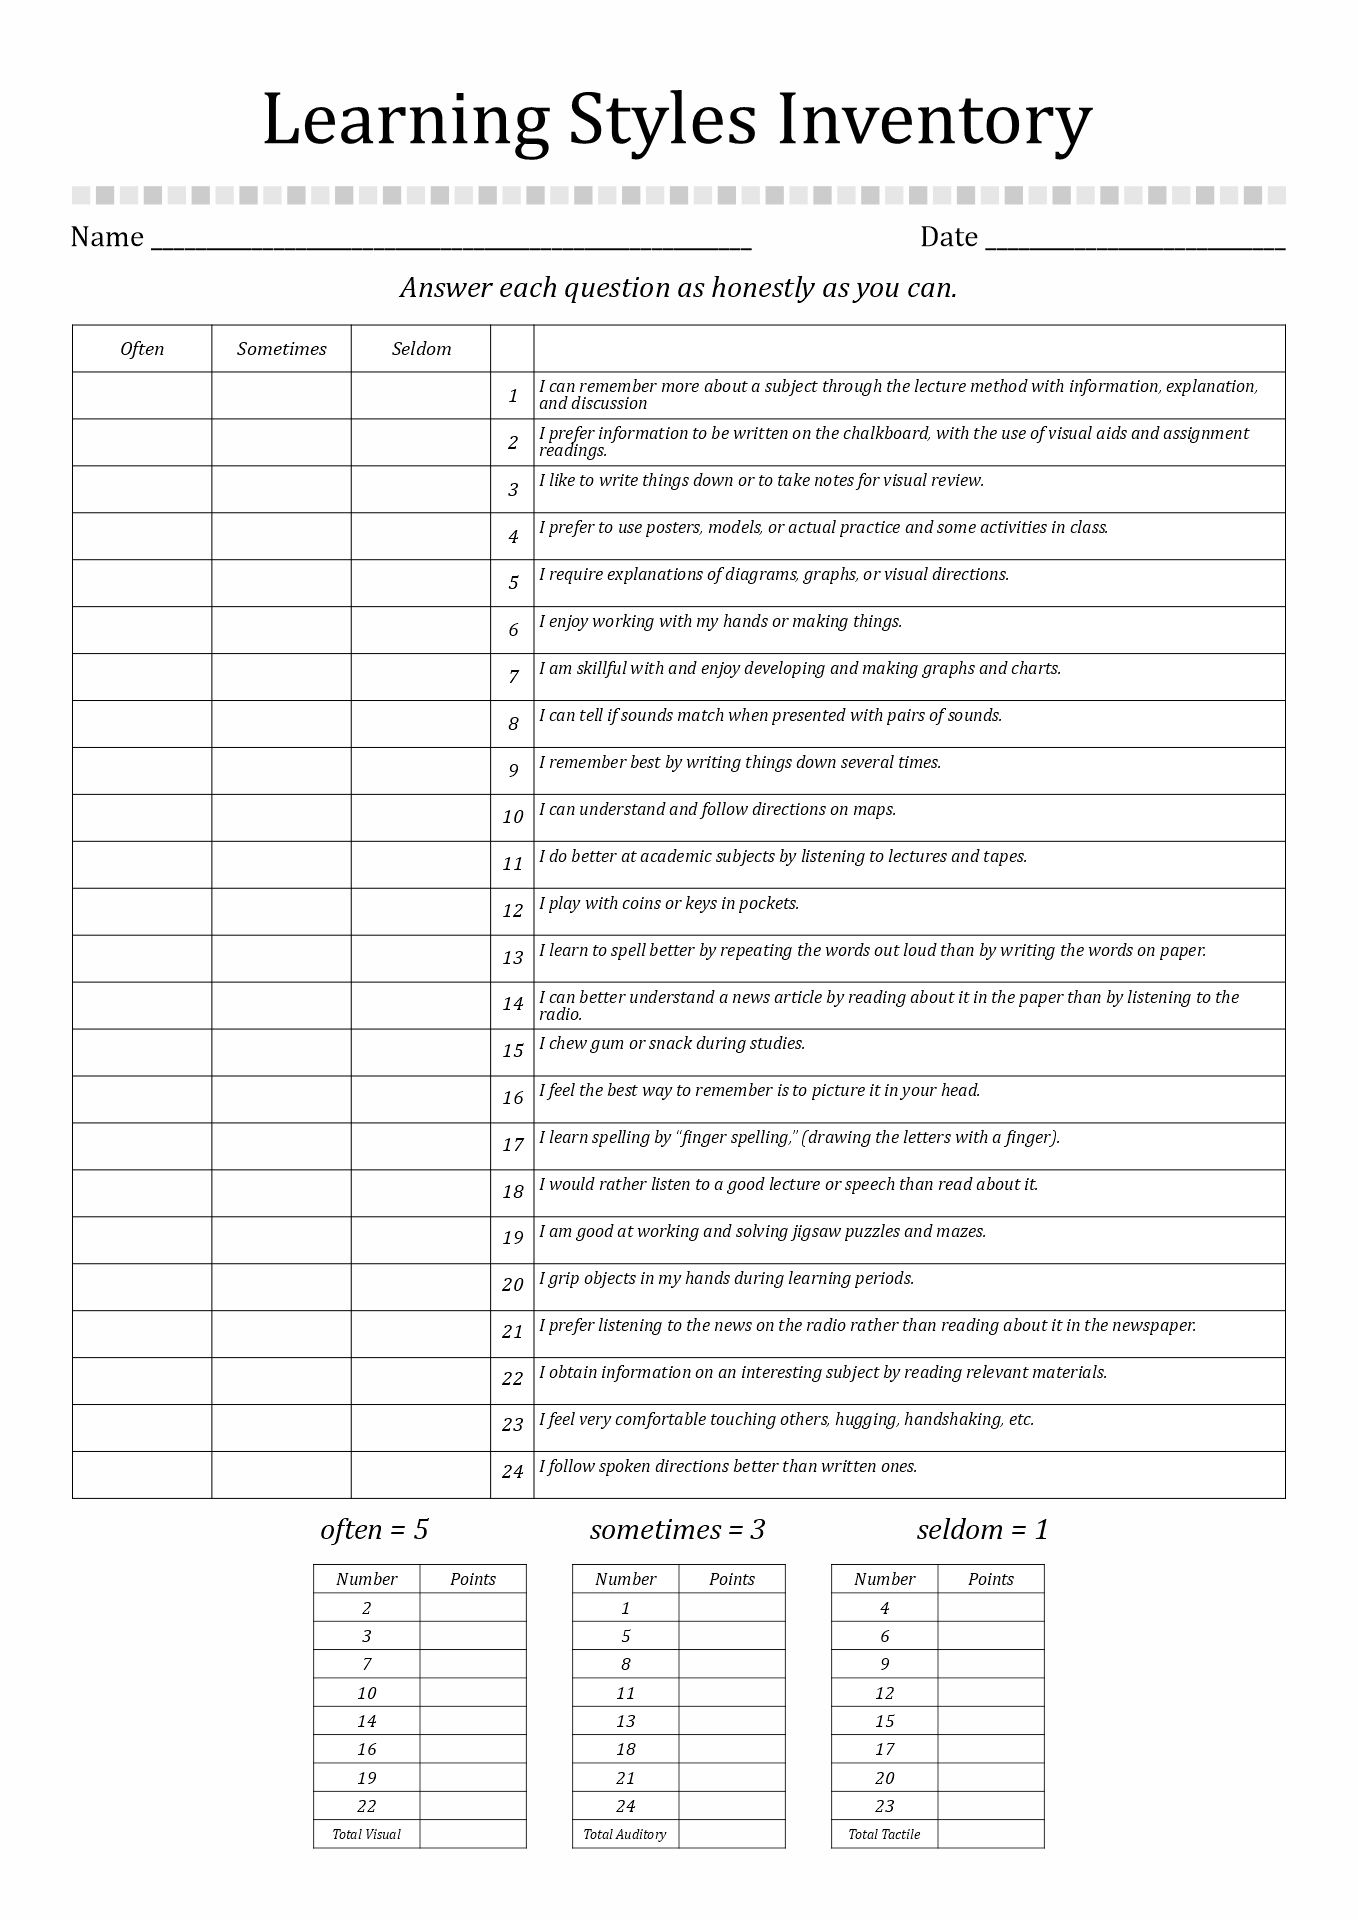 Free Learning Styles Inventory Google Form